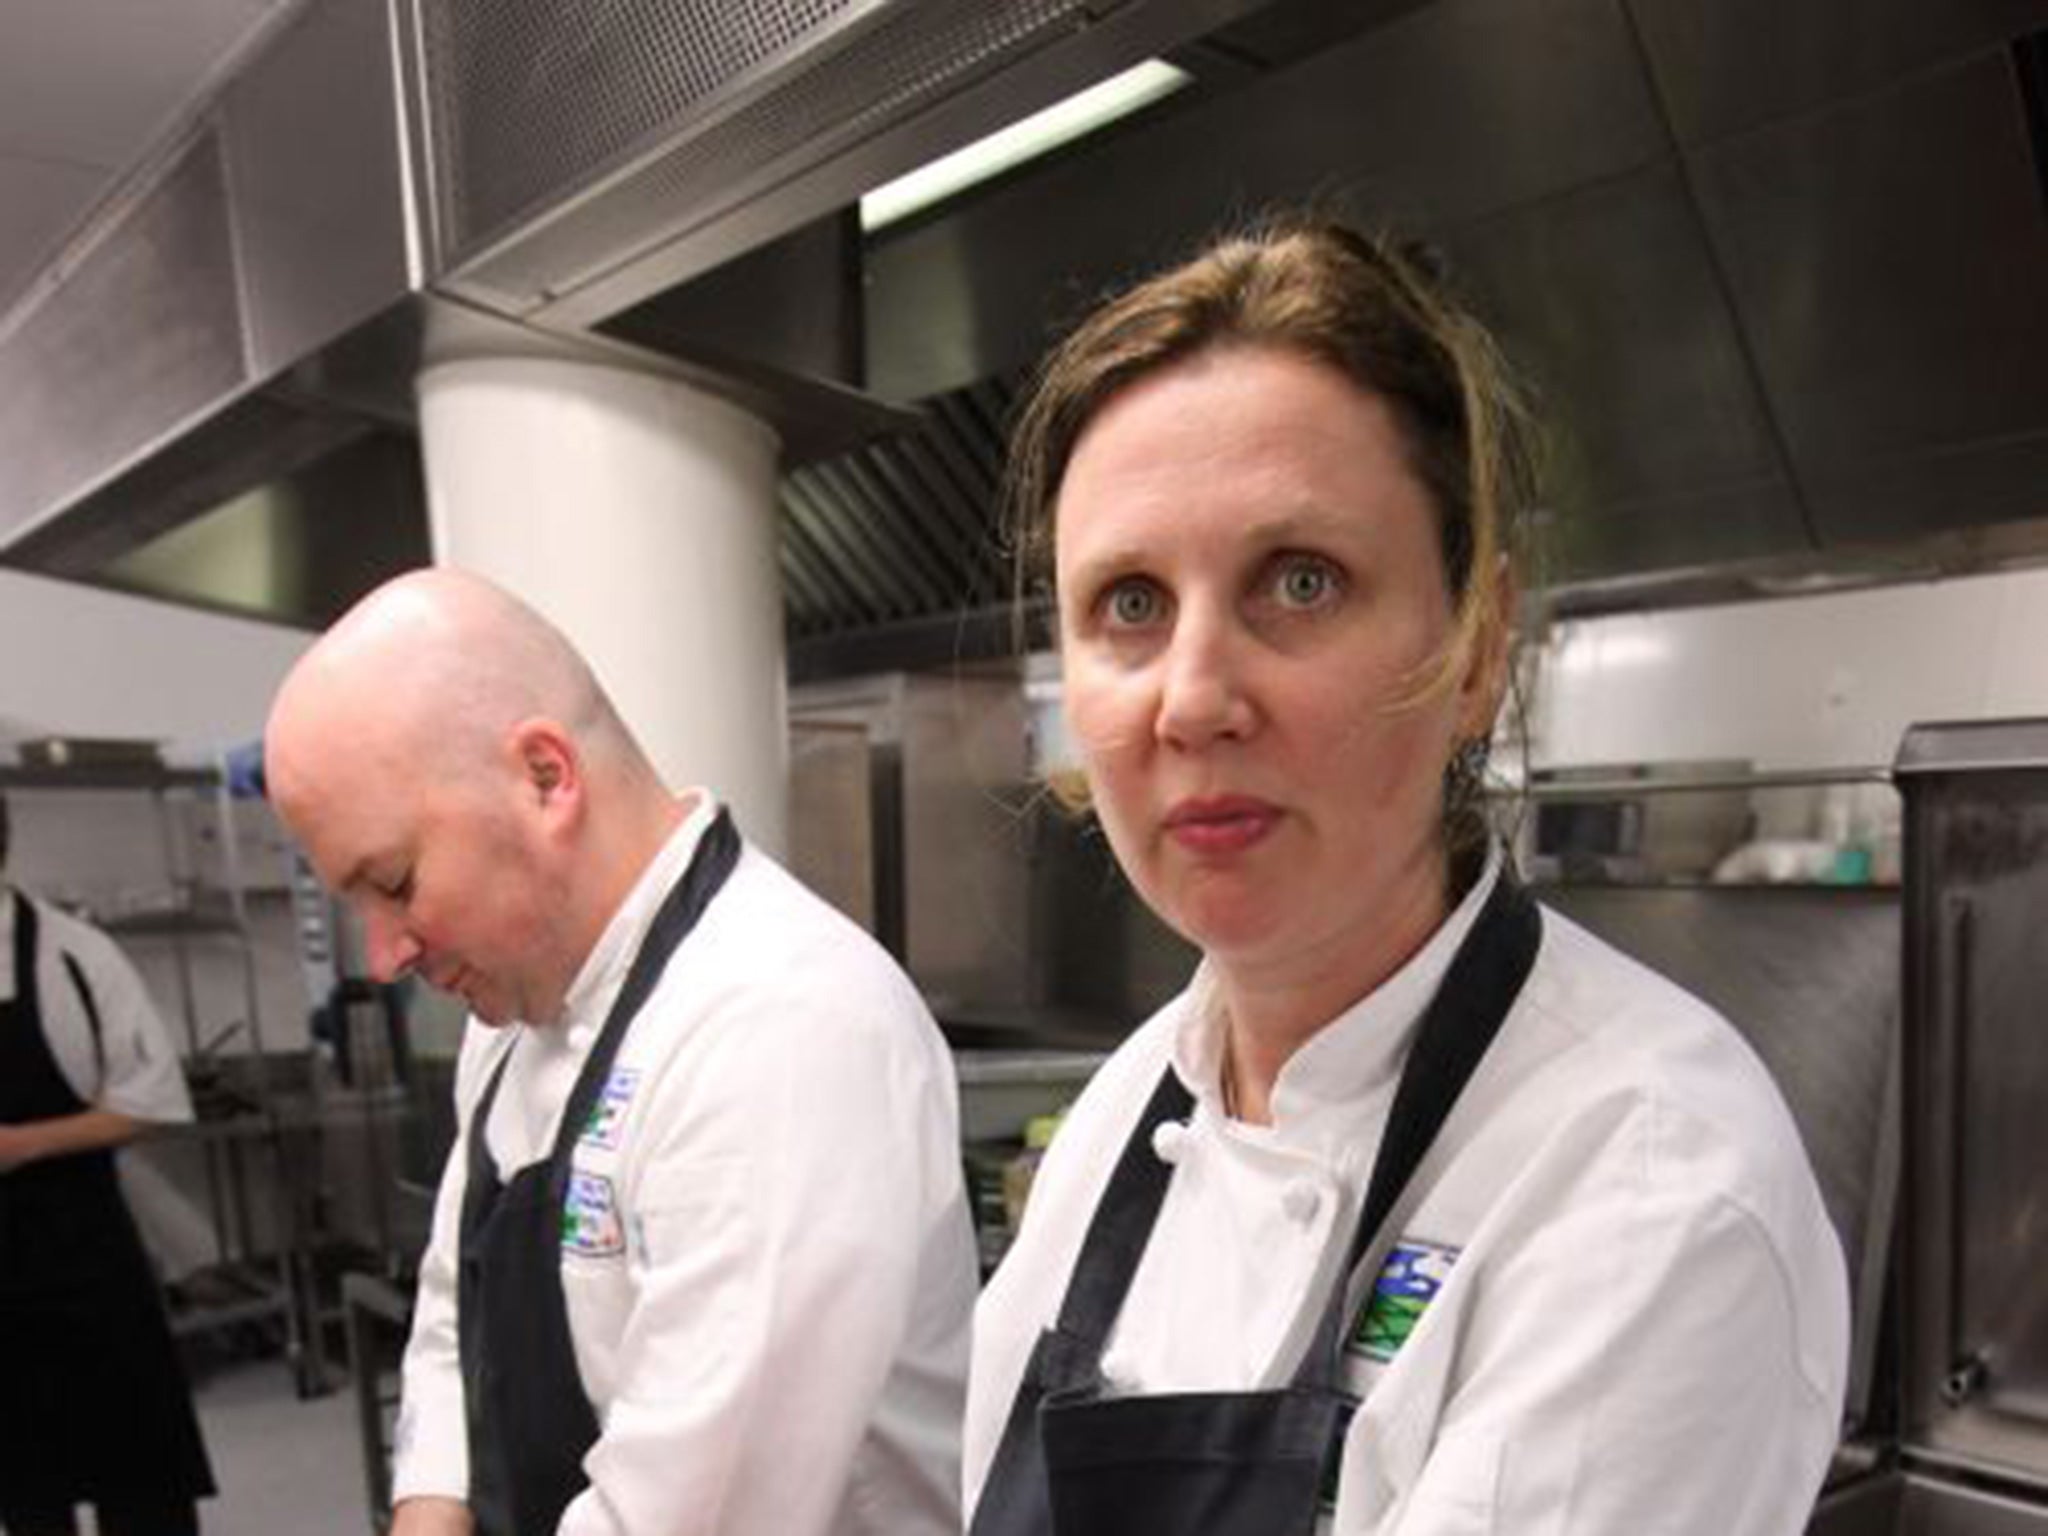 Michelin star chef Angela Hartnett said she was proud to back Action Against Hunger